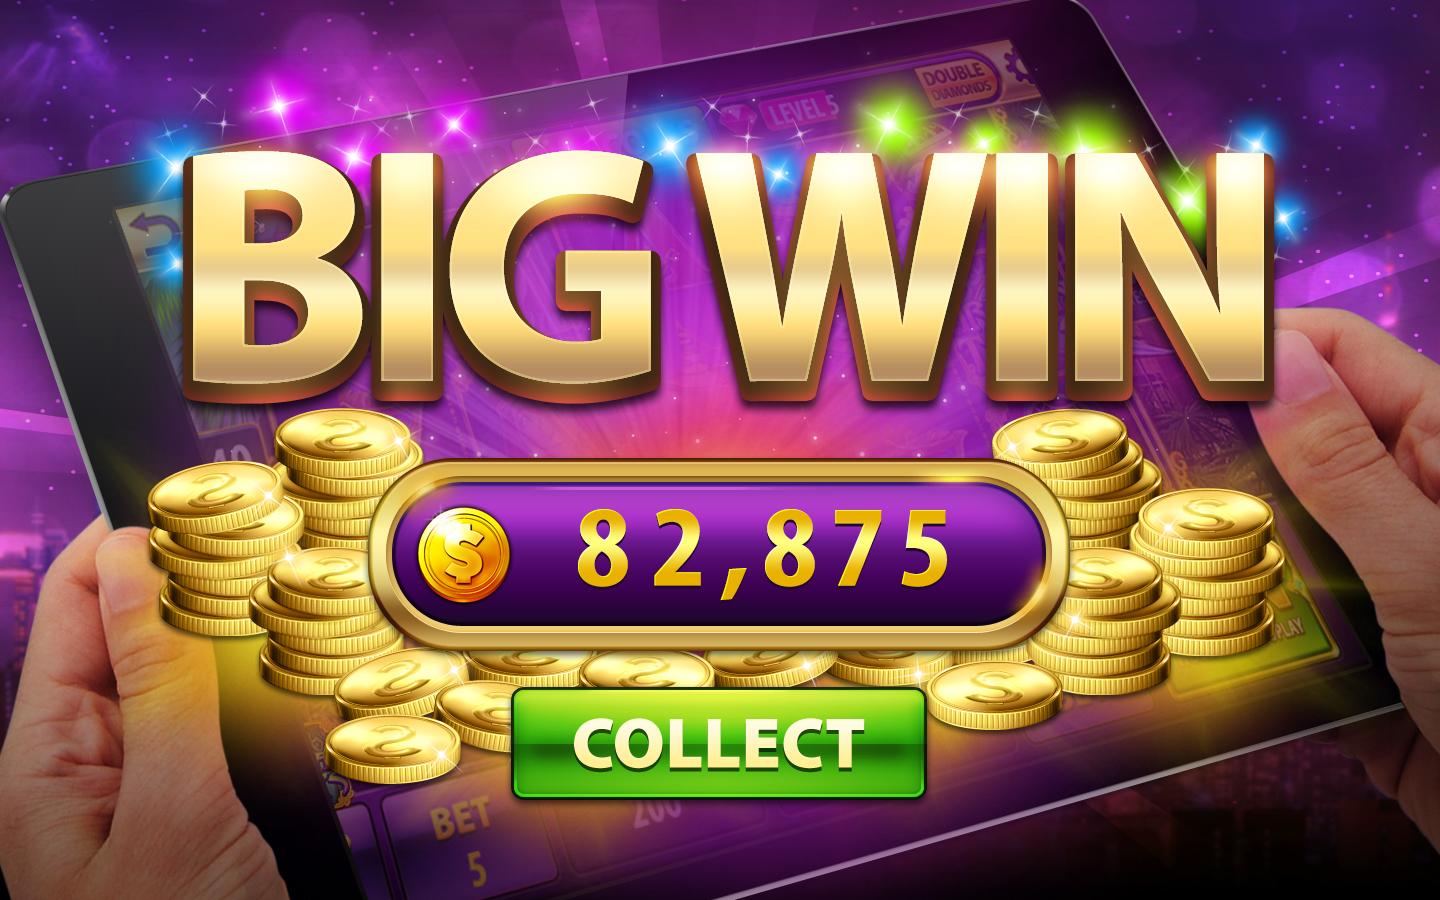 Golden Lion Slots ™-Free Casino 1.05 APK Download - Android Casino Games